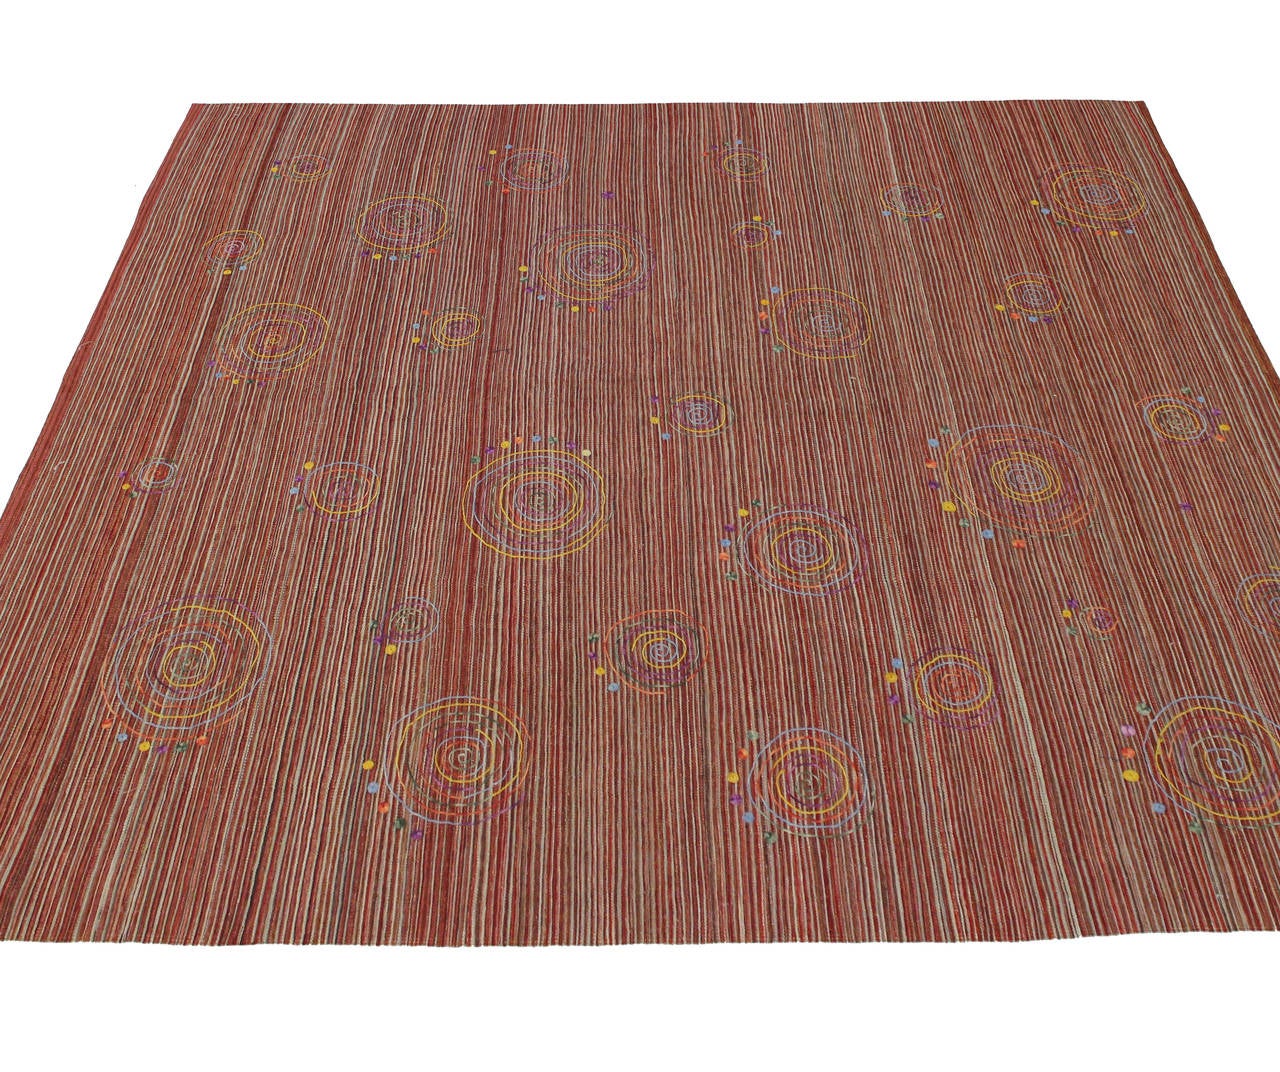 Hand-Woven Vintage Kilim with Embroidered Suzani Design with Bohemian Style